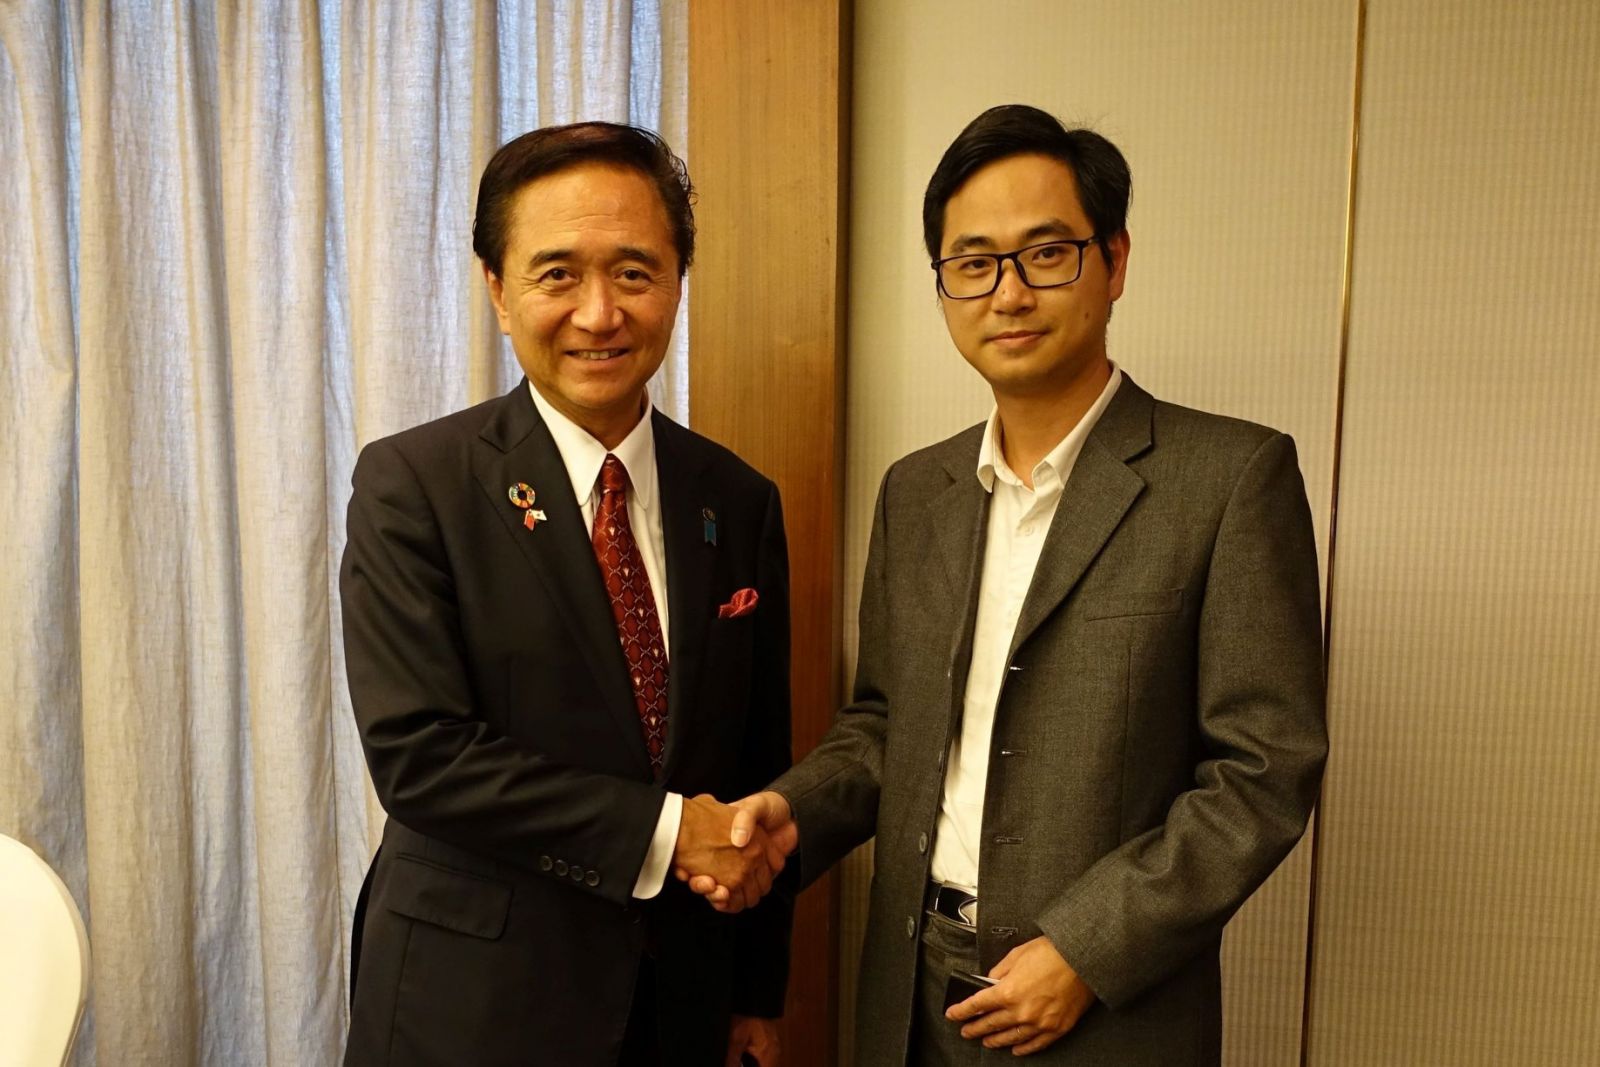 The governor of Kanagawa prefecture meets SotaTek's leader